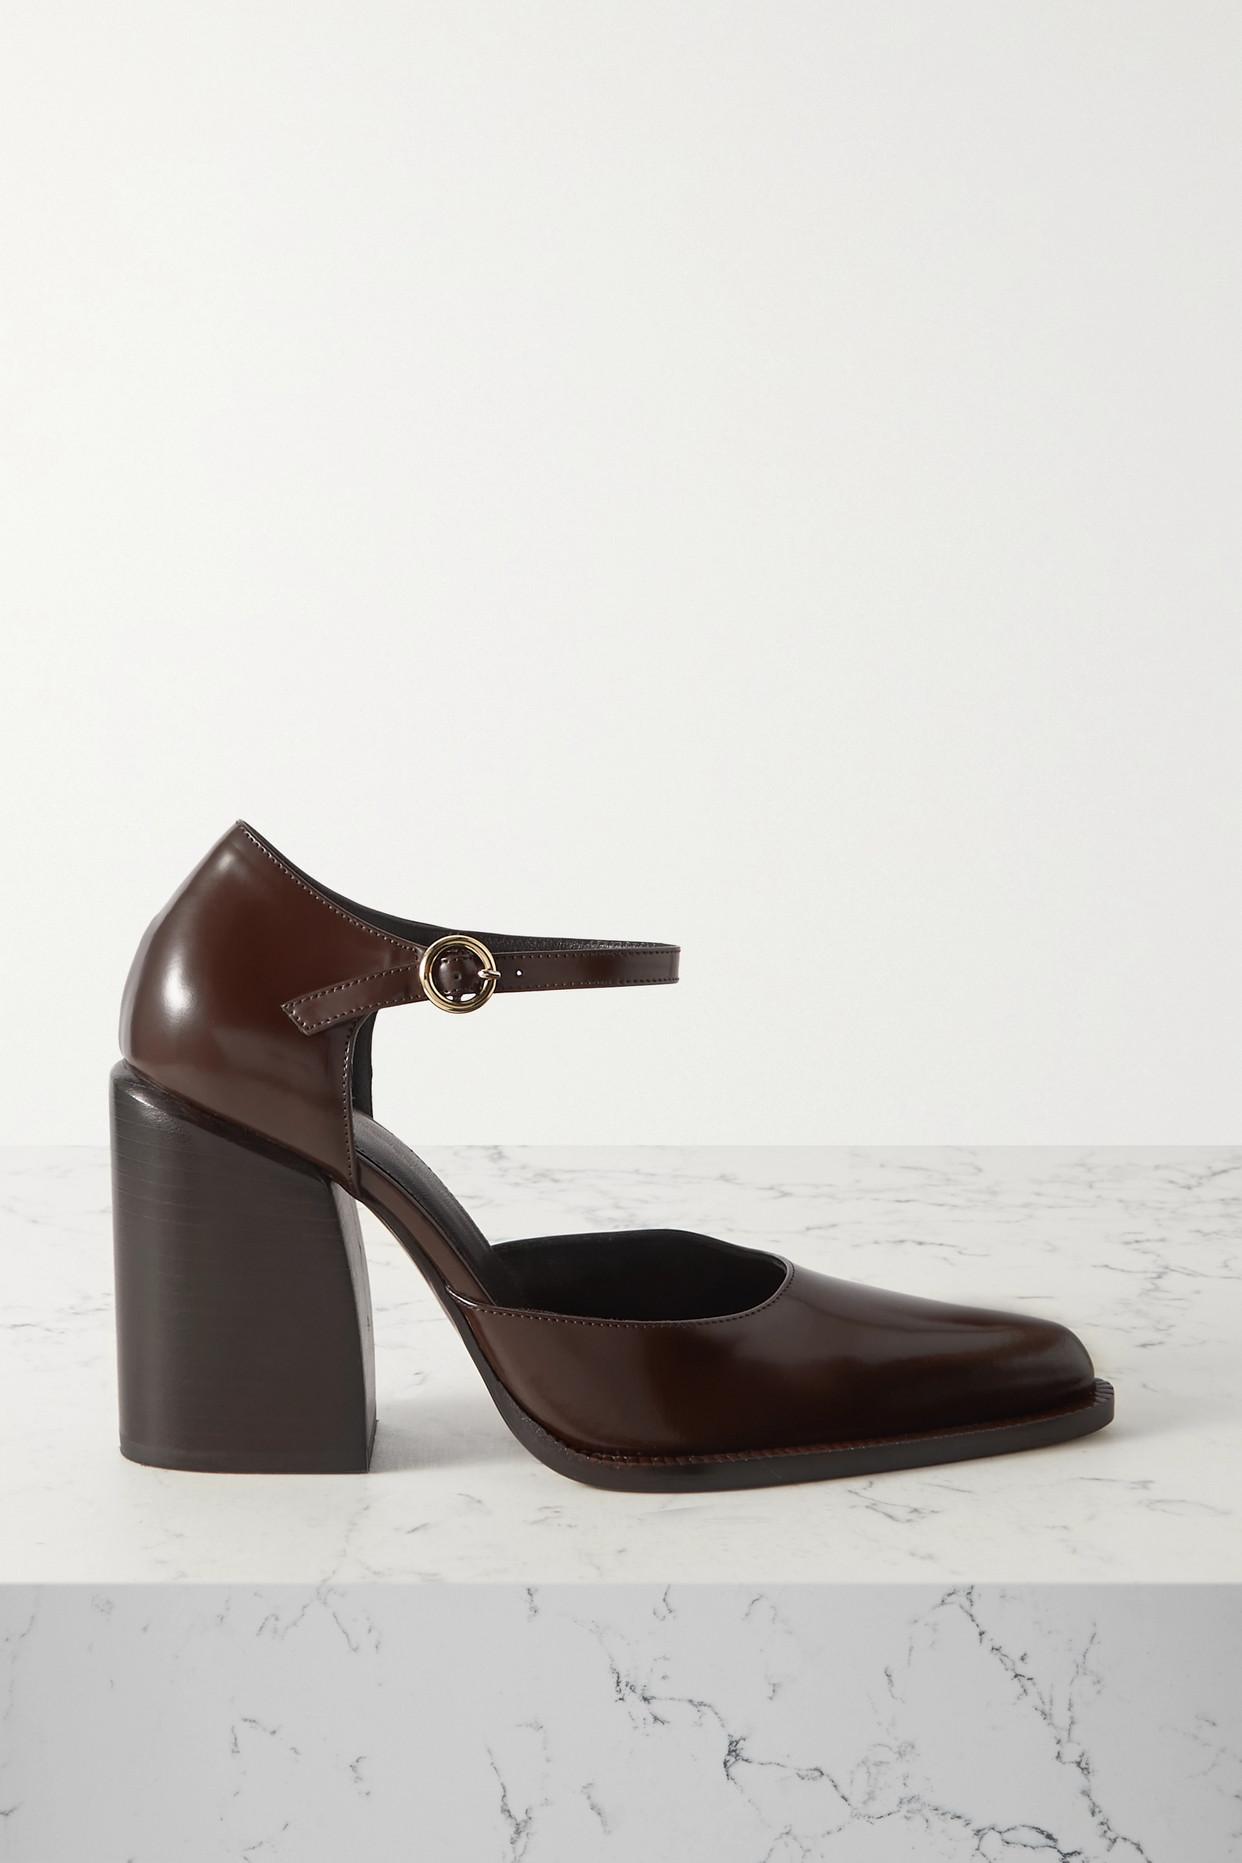 Dries Van Noten Leather Mary Jane Pumps in White | Lyst